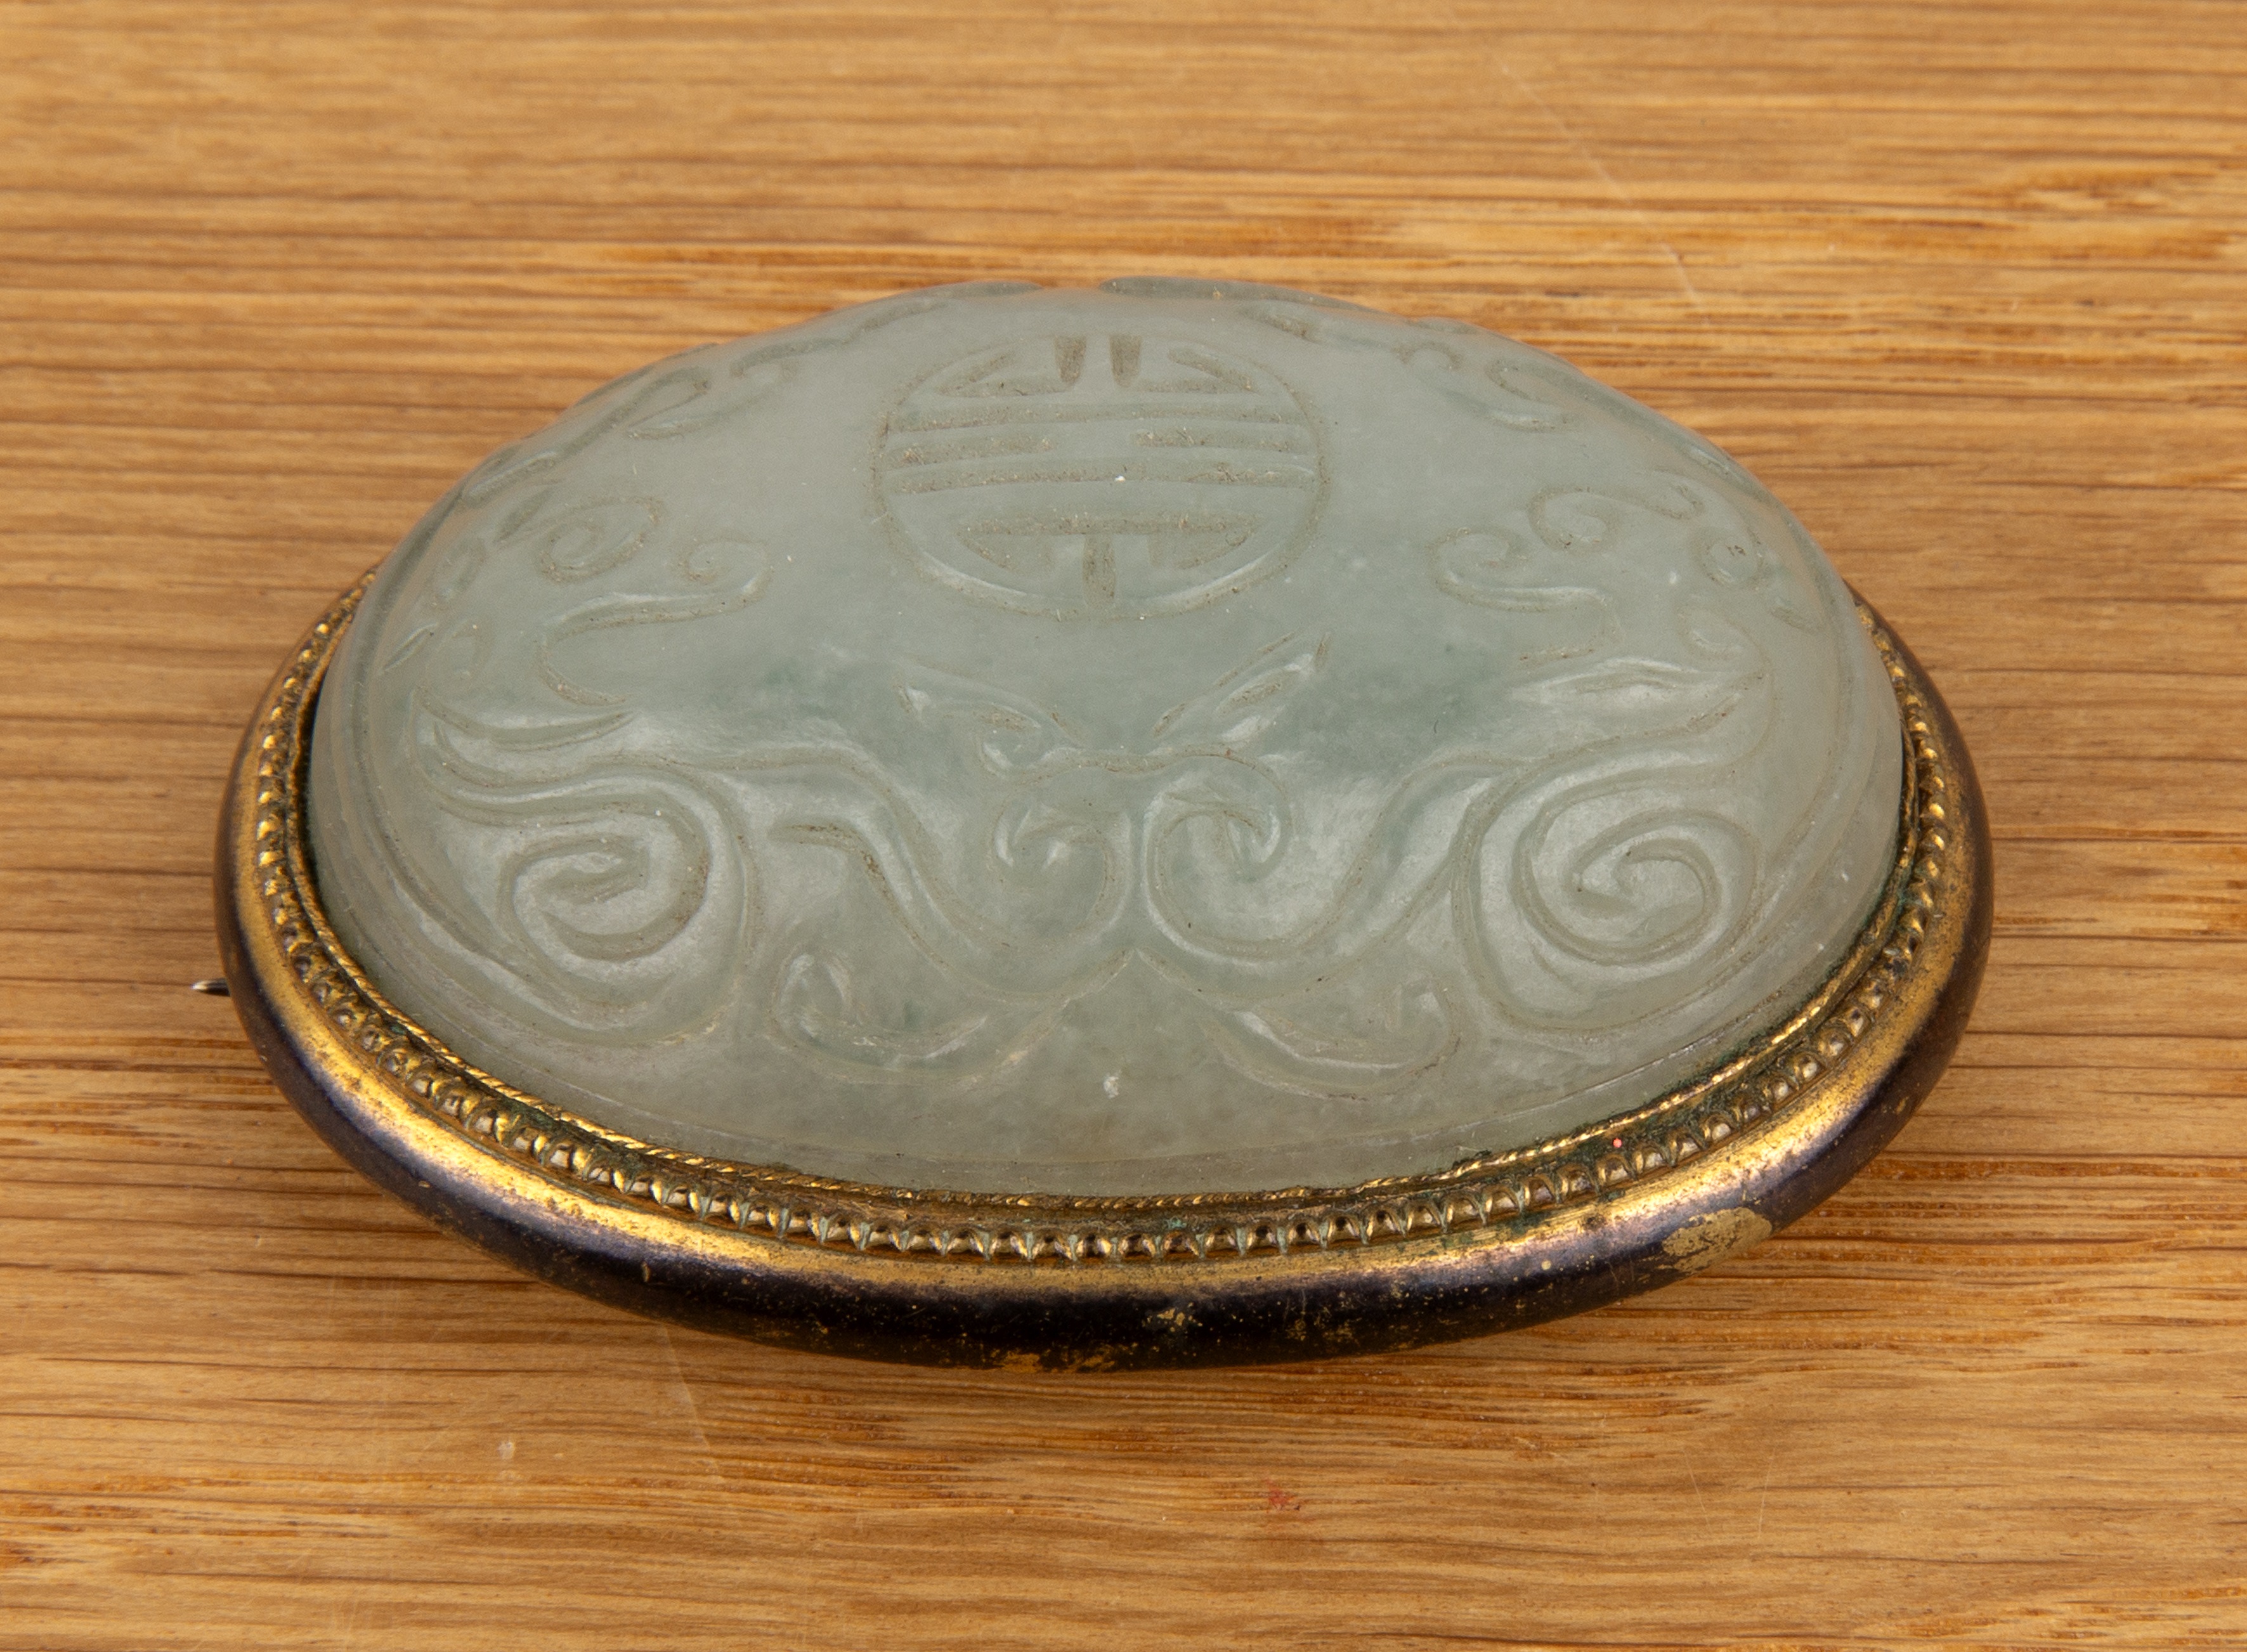 Large pale green oval mounted jade brooch Chinese, 18th/19th Century carved with a central shou - Image 2 of 3